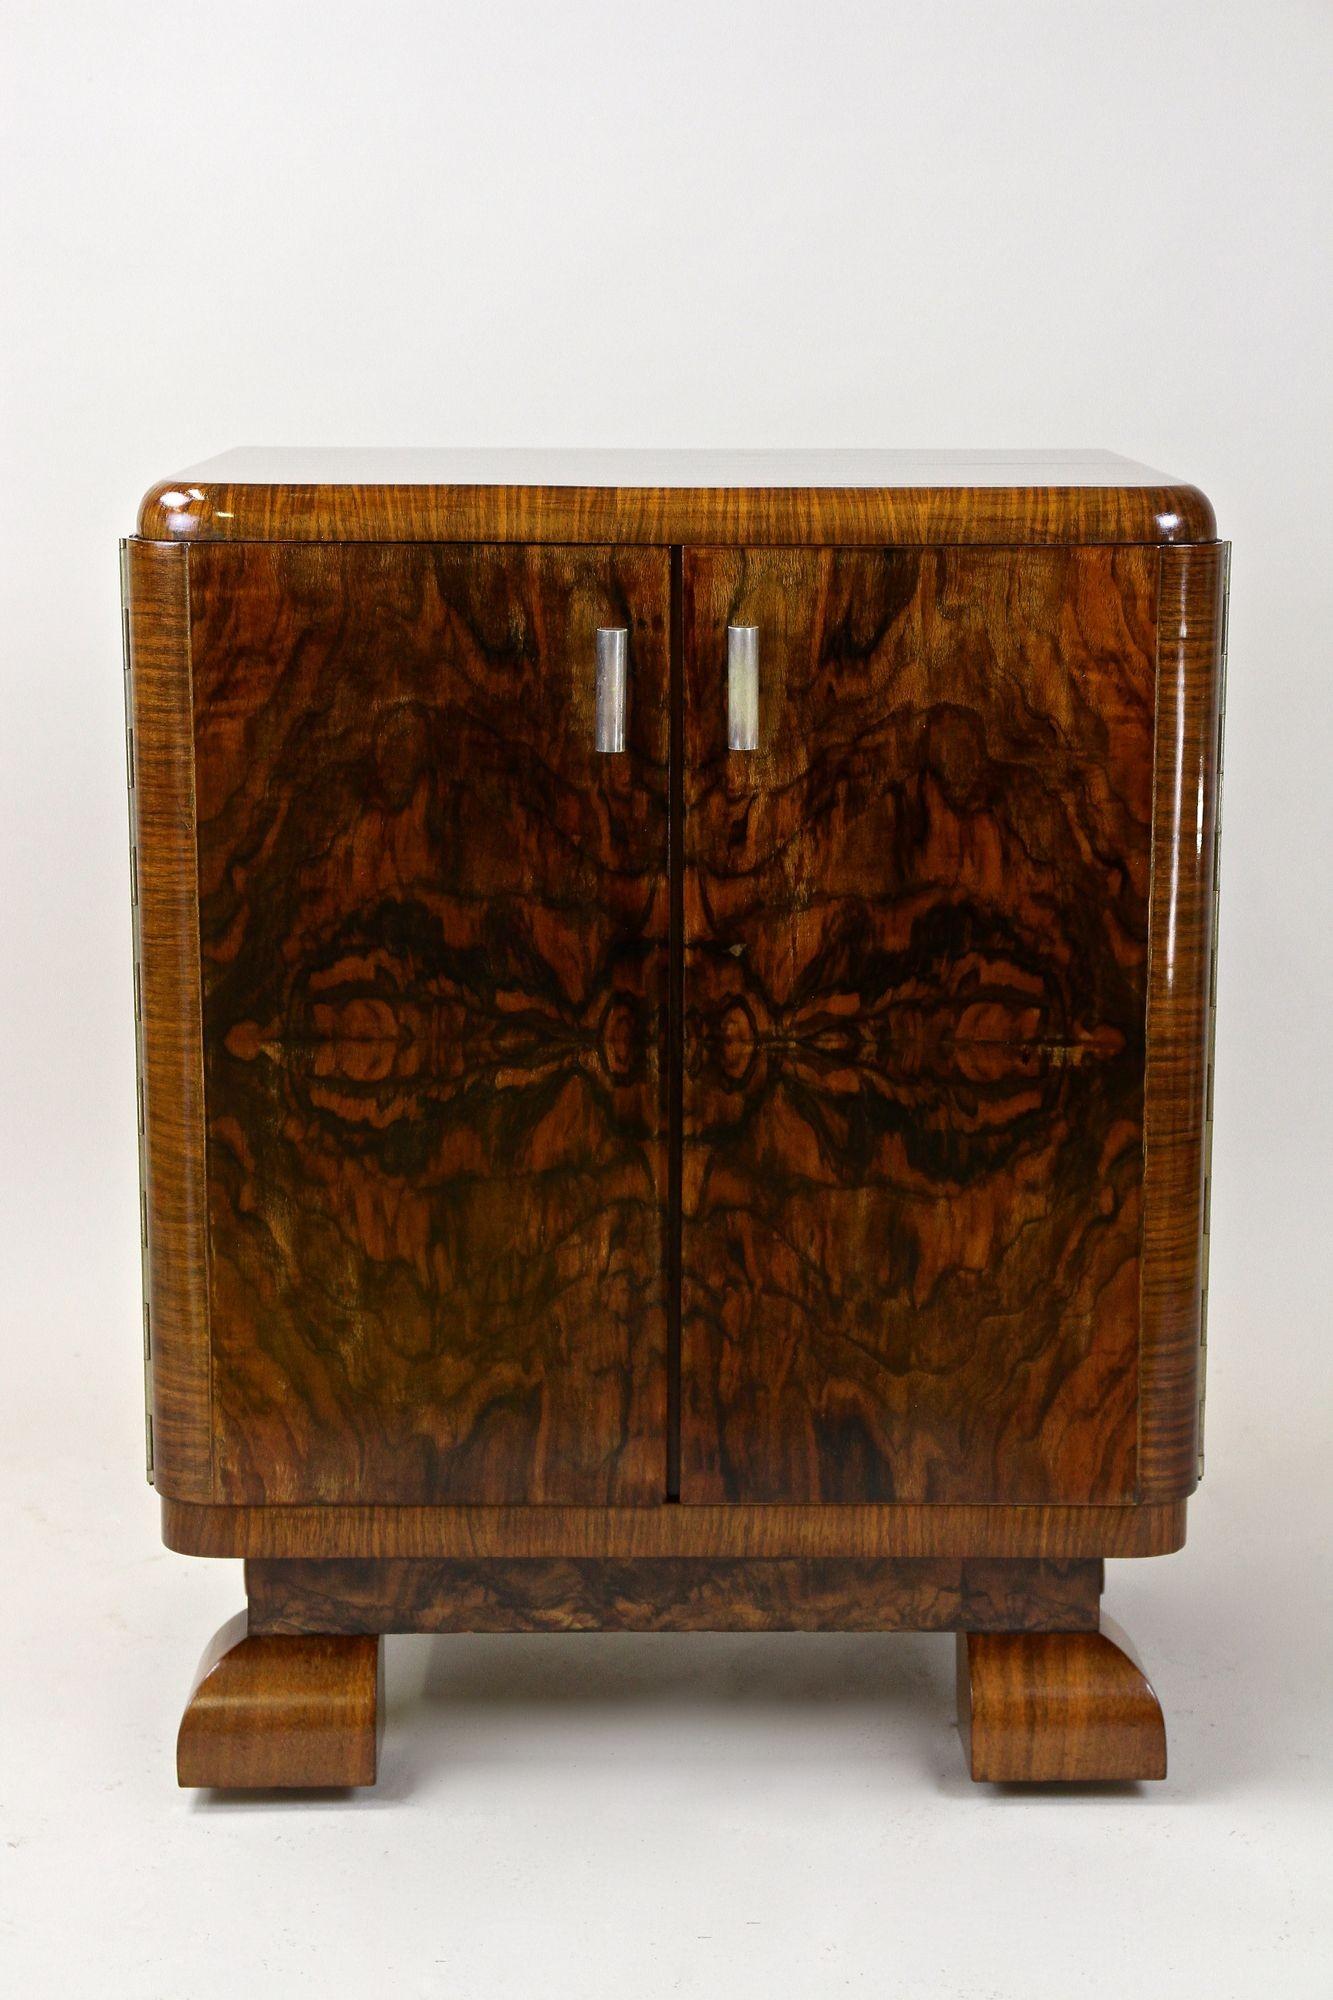 From the Art Deco period around 1925 in Austria comes this breathtaking veneered small Art Deco bar cabinet or commode. Perfectly restored in our restoration workshops, this unique commode/ bar cabinet was made with fine burr walnut showing an